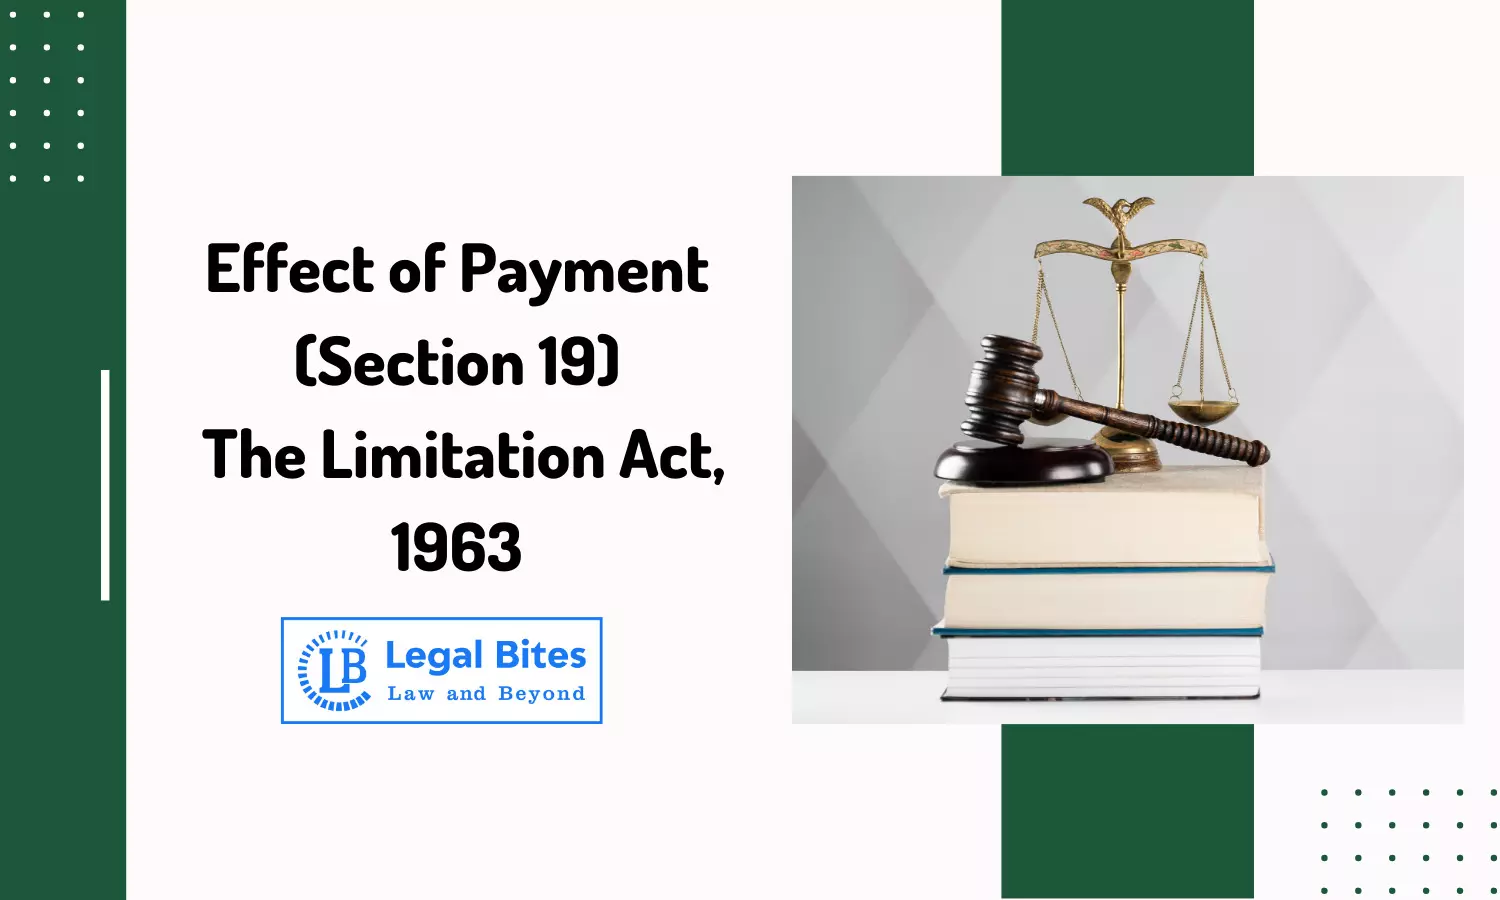 Effect of Payment (Section 19) | The Limitation Act, 1963